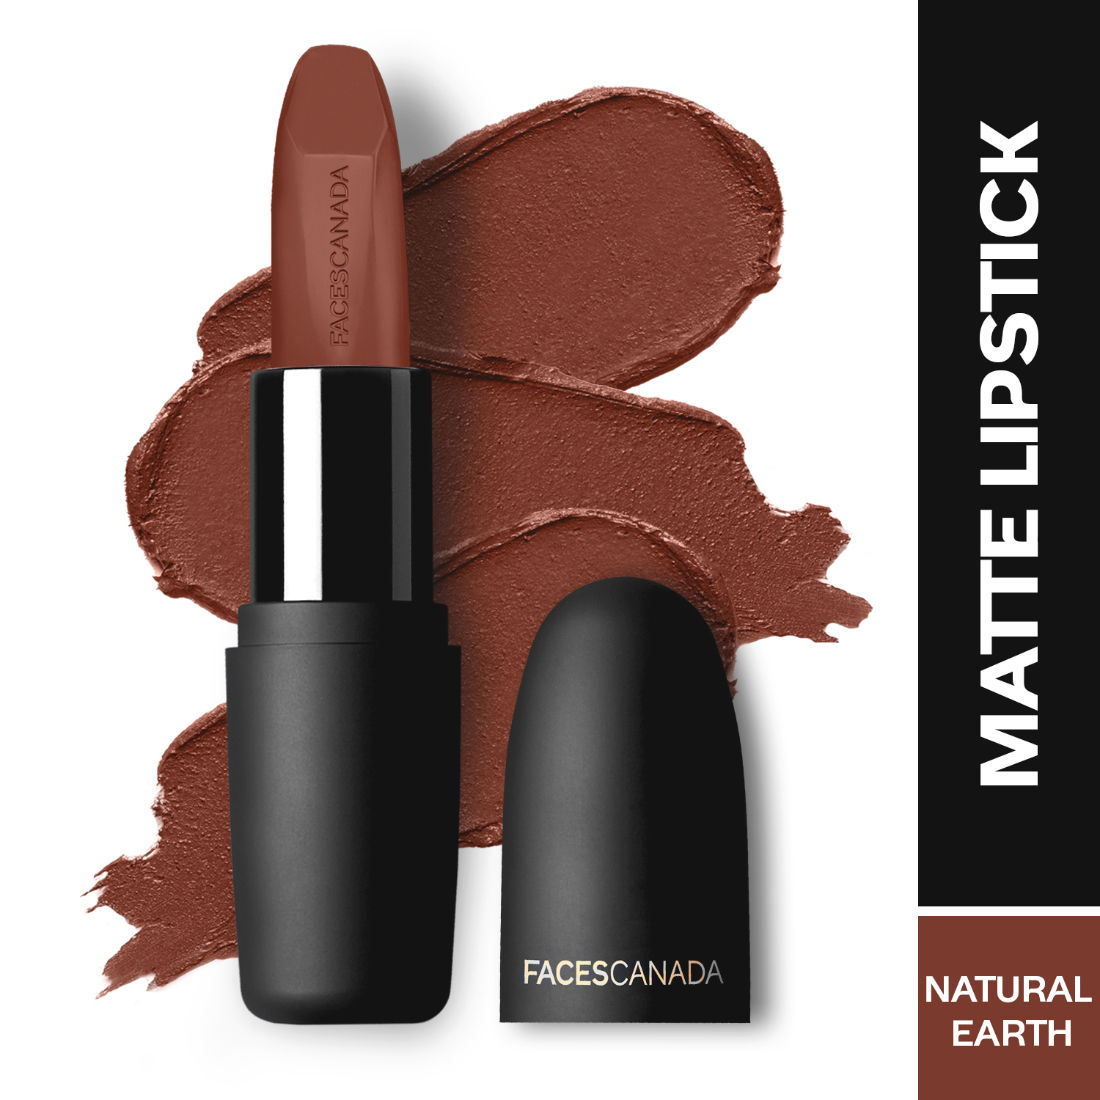 Buy FACES CANADA Weightless Matte Lipstick - Natural Earth 15, 4.5g | High Pigment | Smooth One Stroke Glide | Moisturizes & Hydrates Lips | Vitamin E, Jojoba & Almond Oil - Purplle